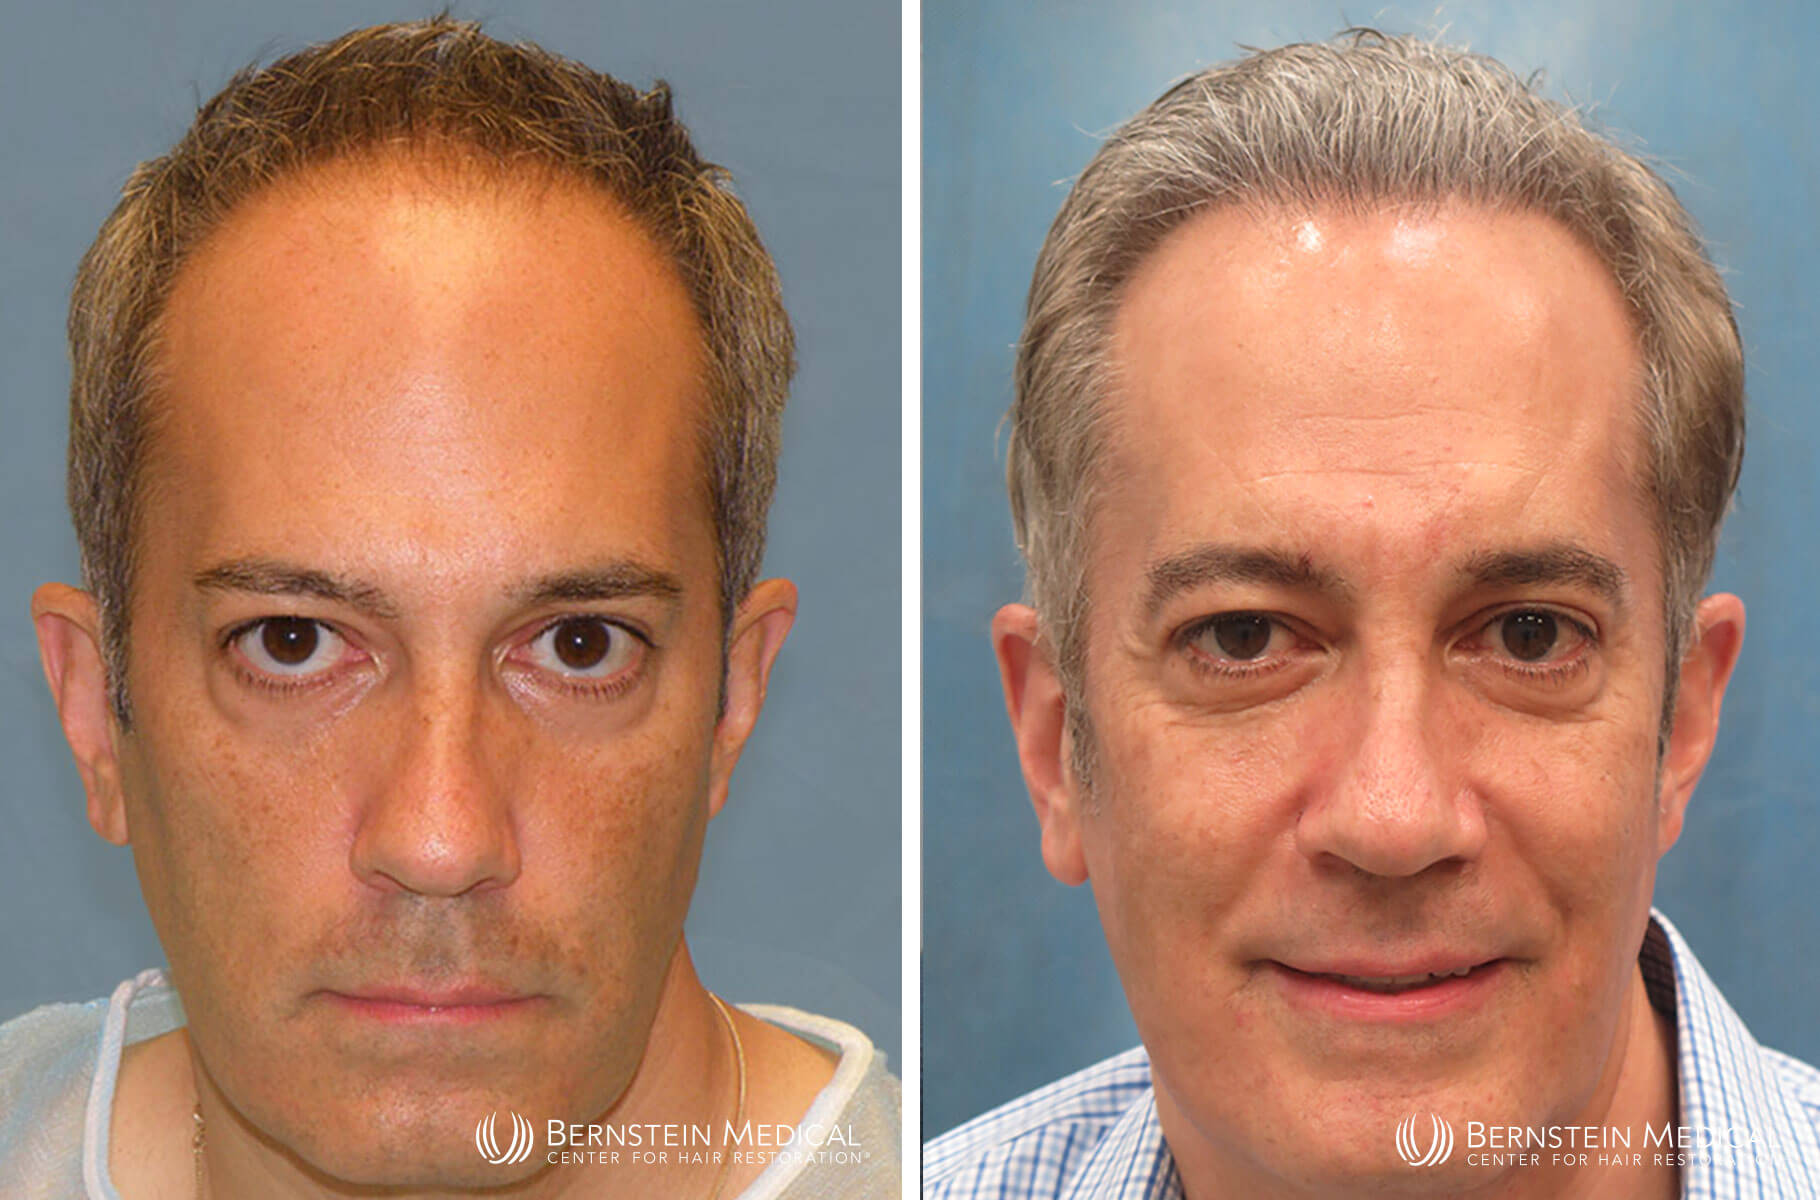 Bernstein Medical - Patient RGI Before and After Hair Transplant Photo 